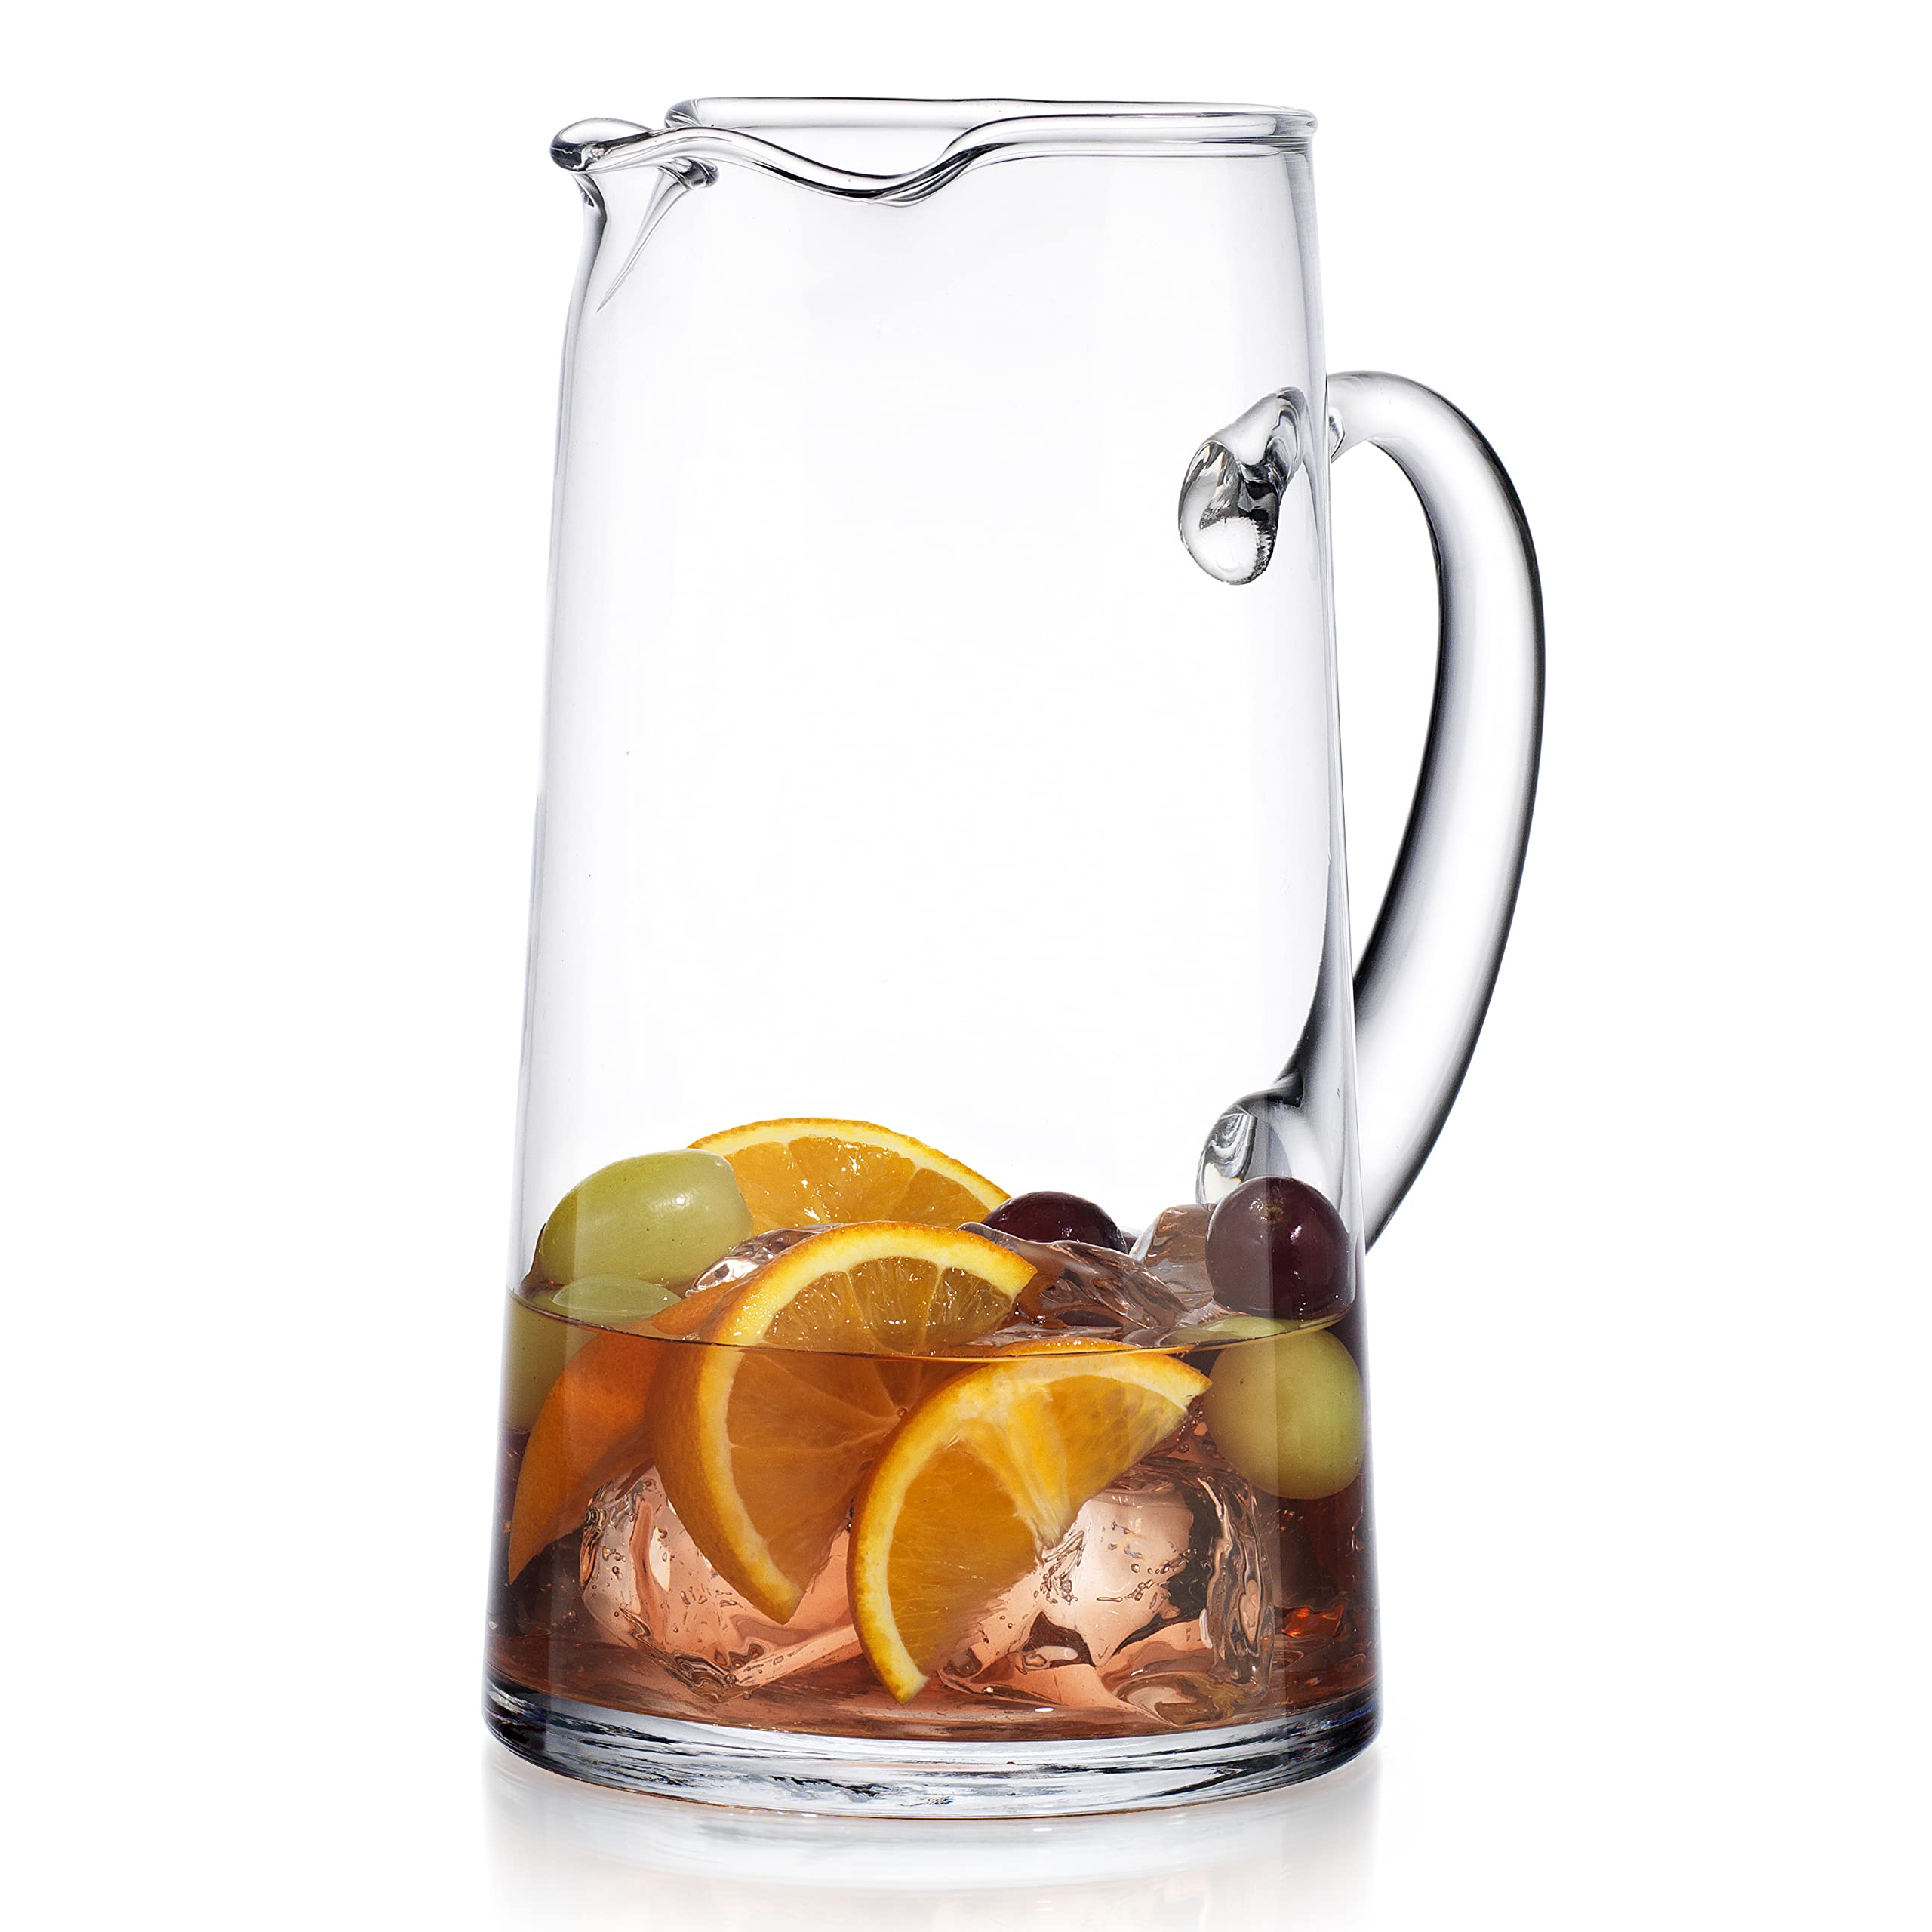 Glass Water Pitcher with Spout – Elegant Serving Carafe for Water, Juice, Sangria, Lemonade, and Cocktails – Crystal-Clear Glass Beverage Pitcher.  - Good